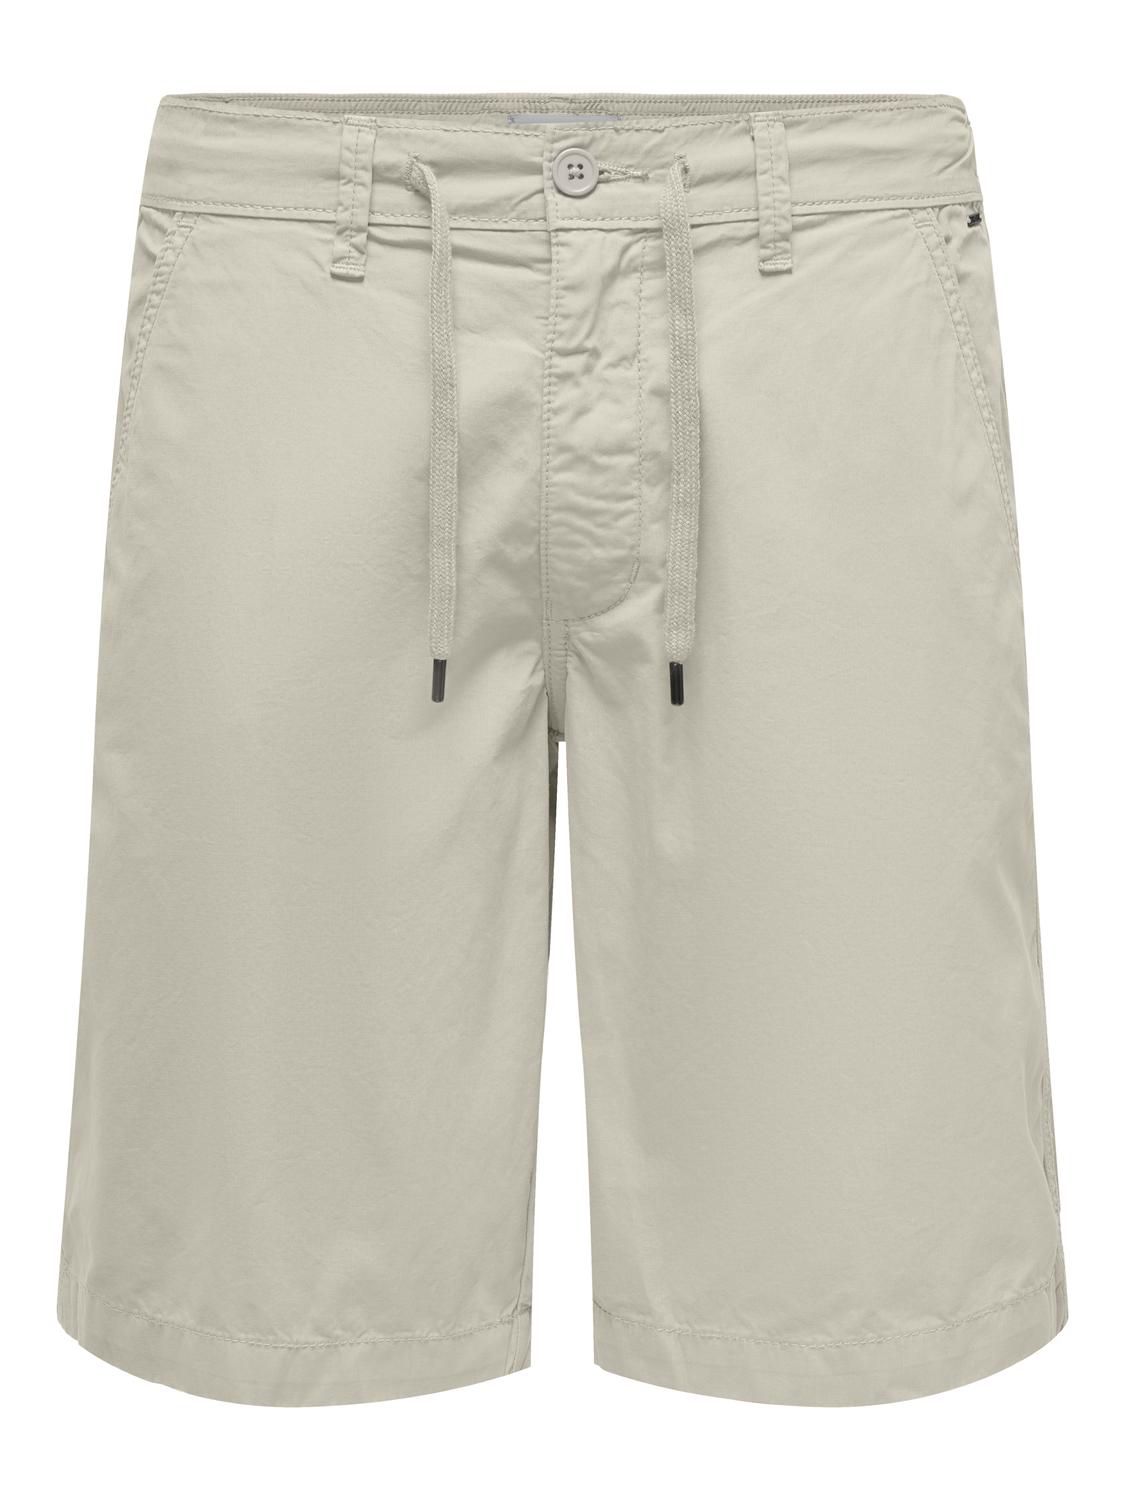 Only & Sons Loc Shorts 0157 Shorts